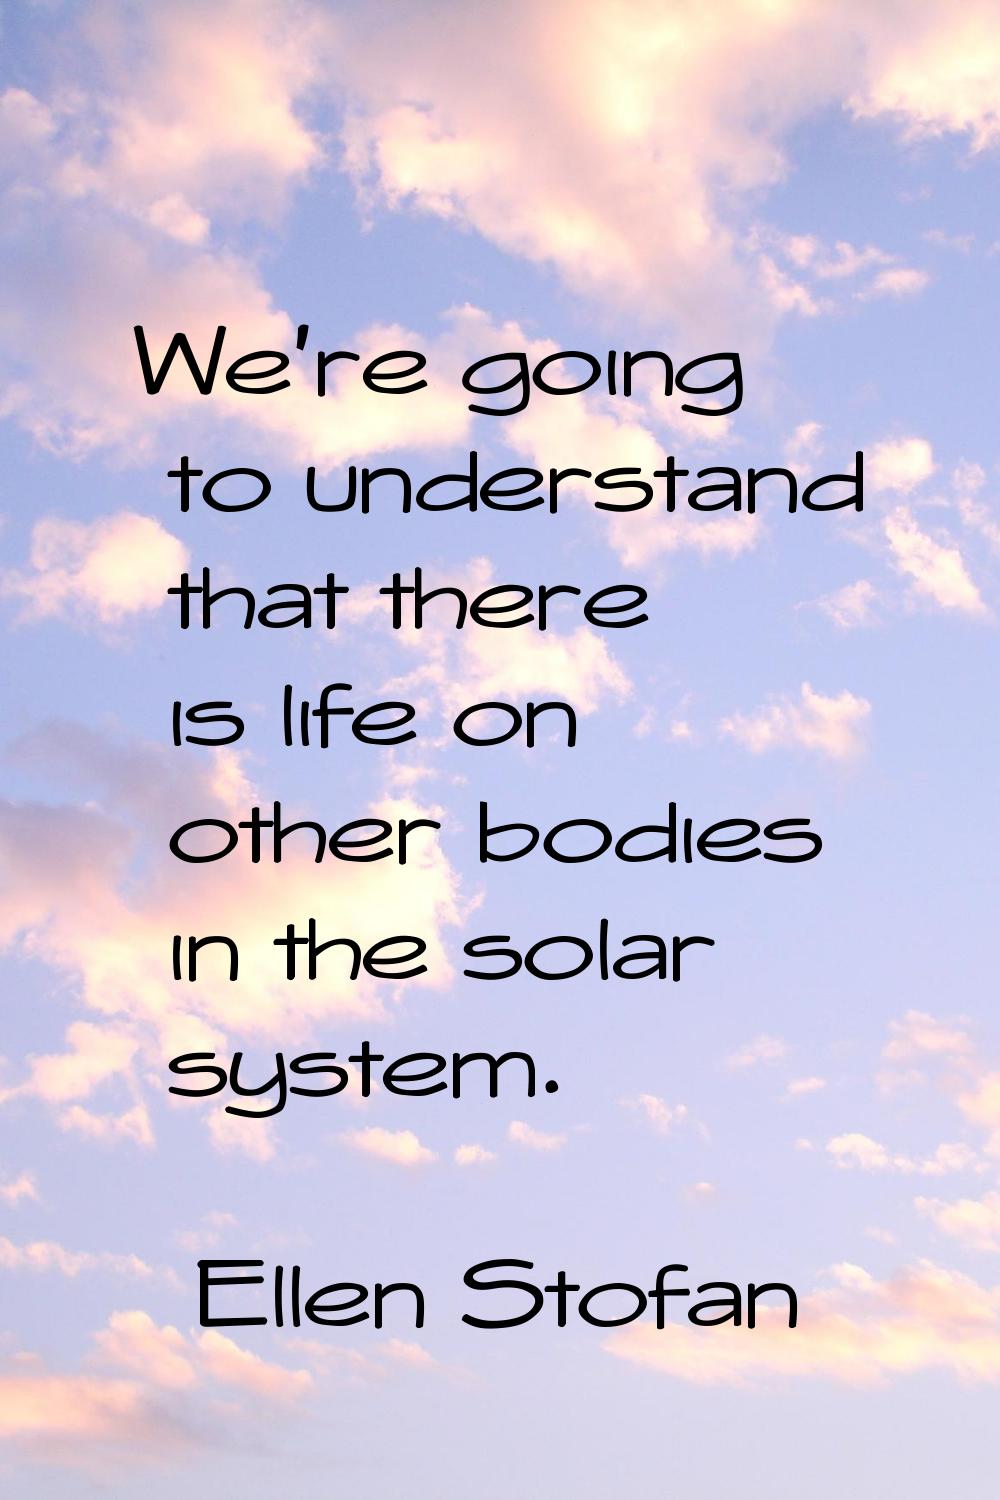 We're going to understand that there is life on other bodies in the solar system.